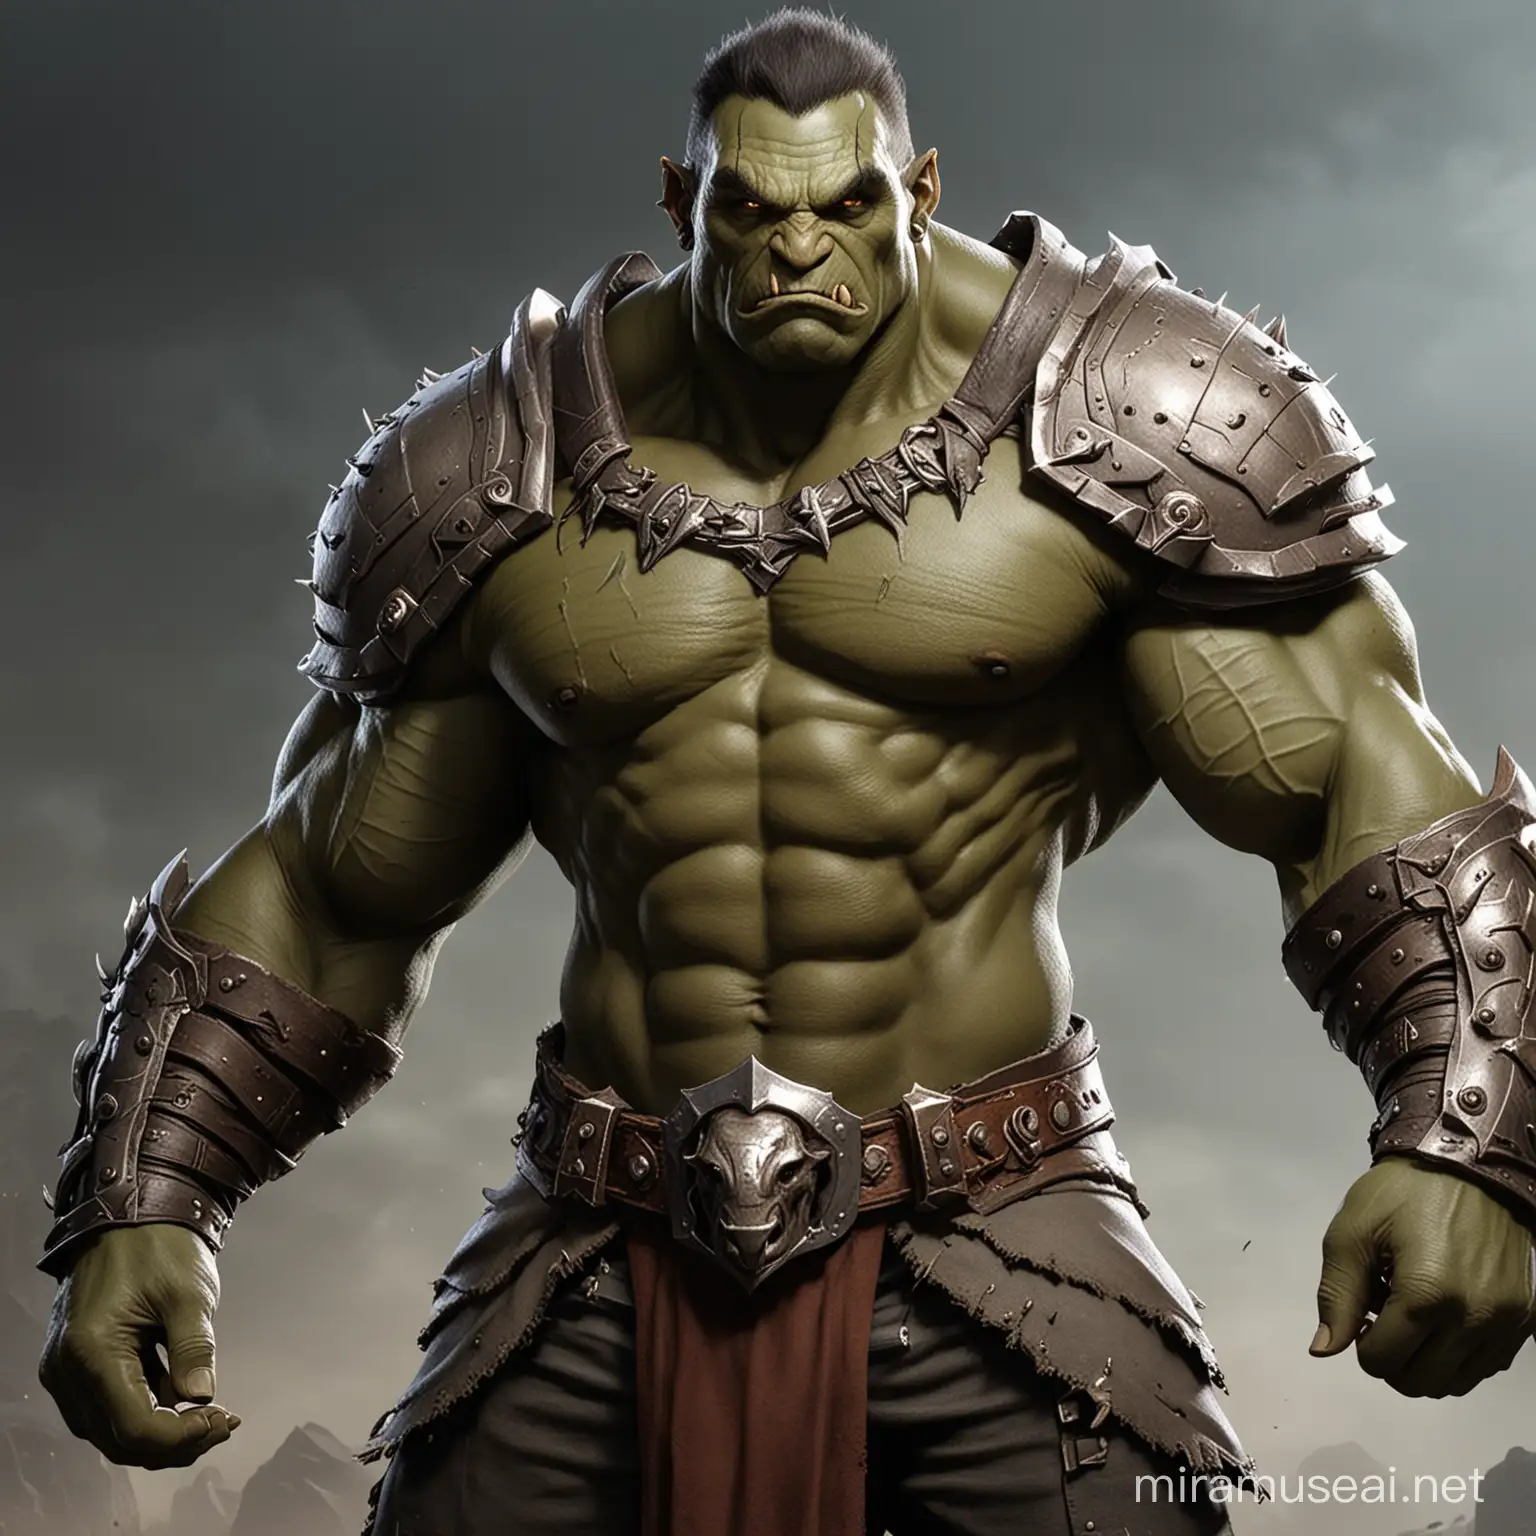 Majestic Male Orc Paladin Towering Muscular Figure with Earthlike Eyes